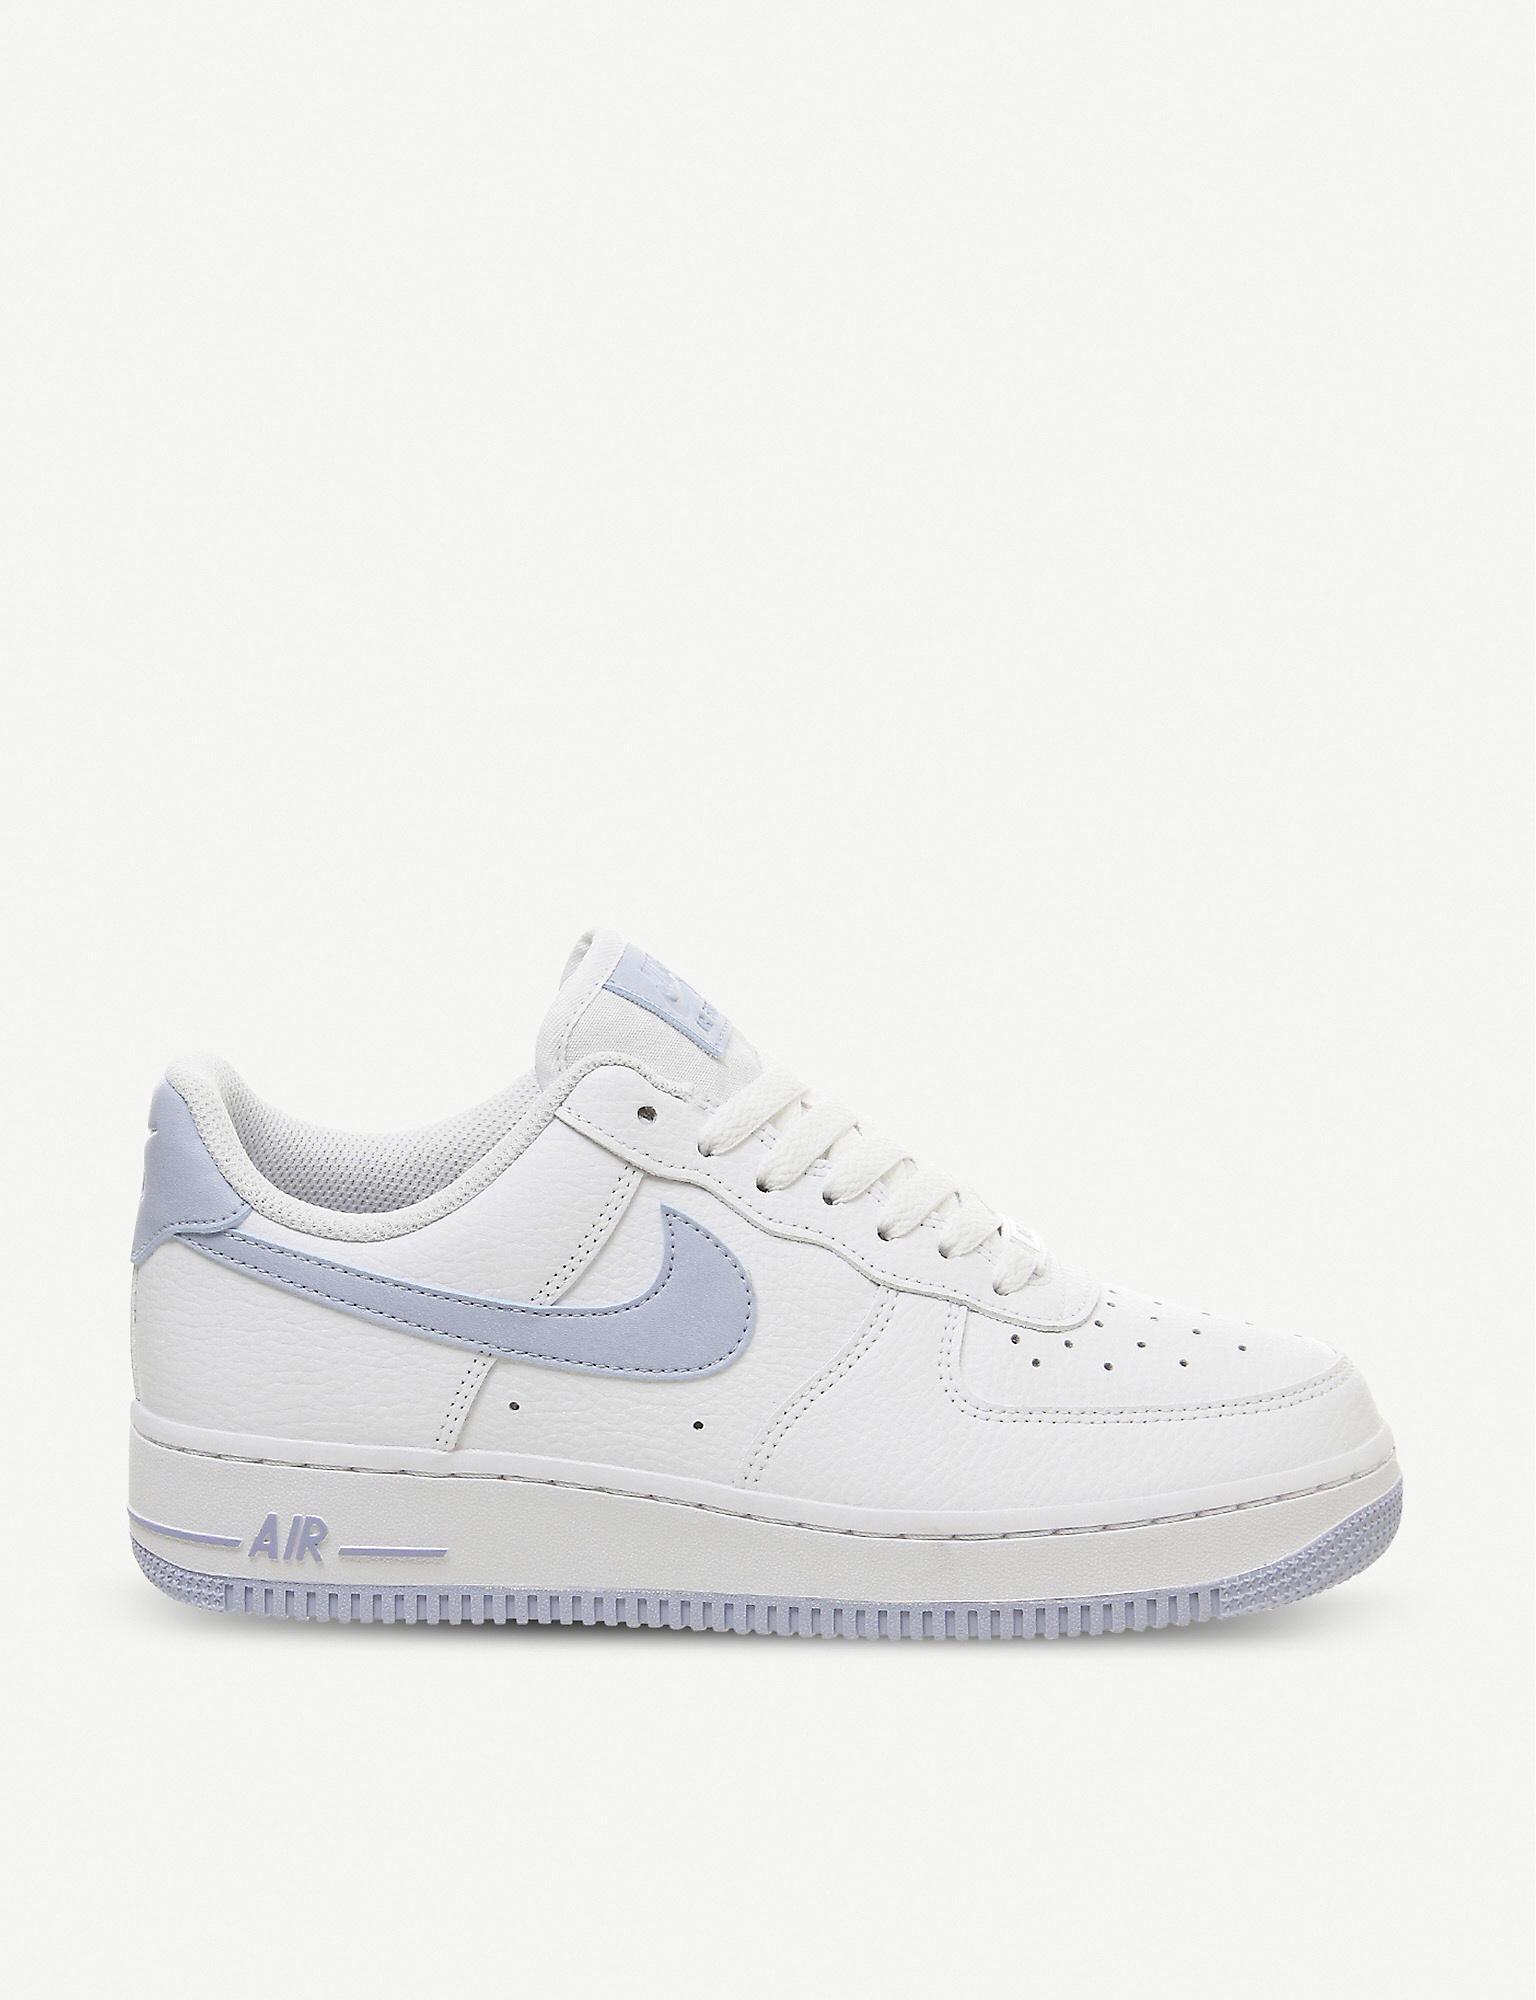 nike air force 1 trainers in white and blue